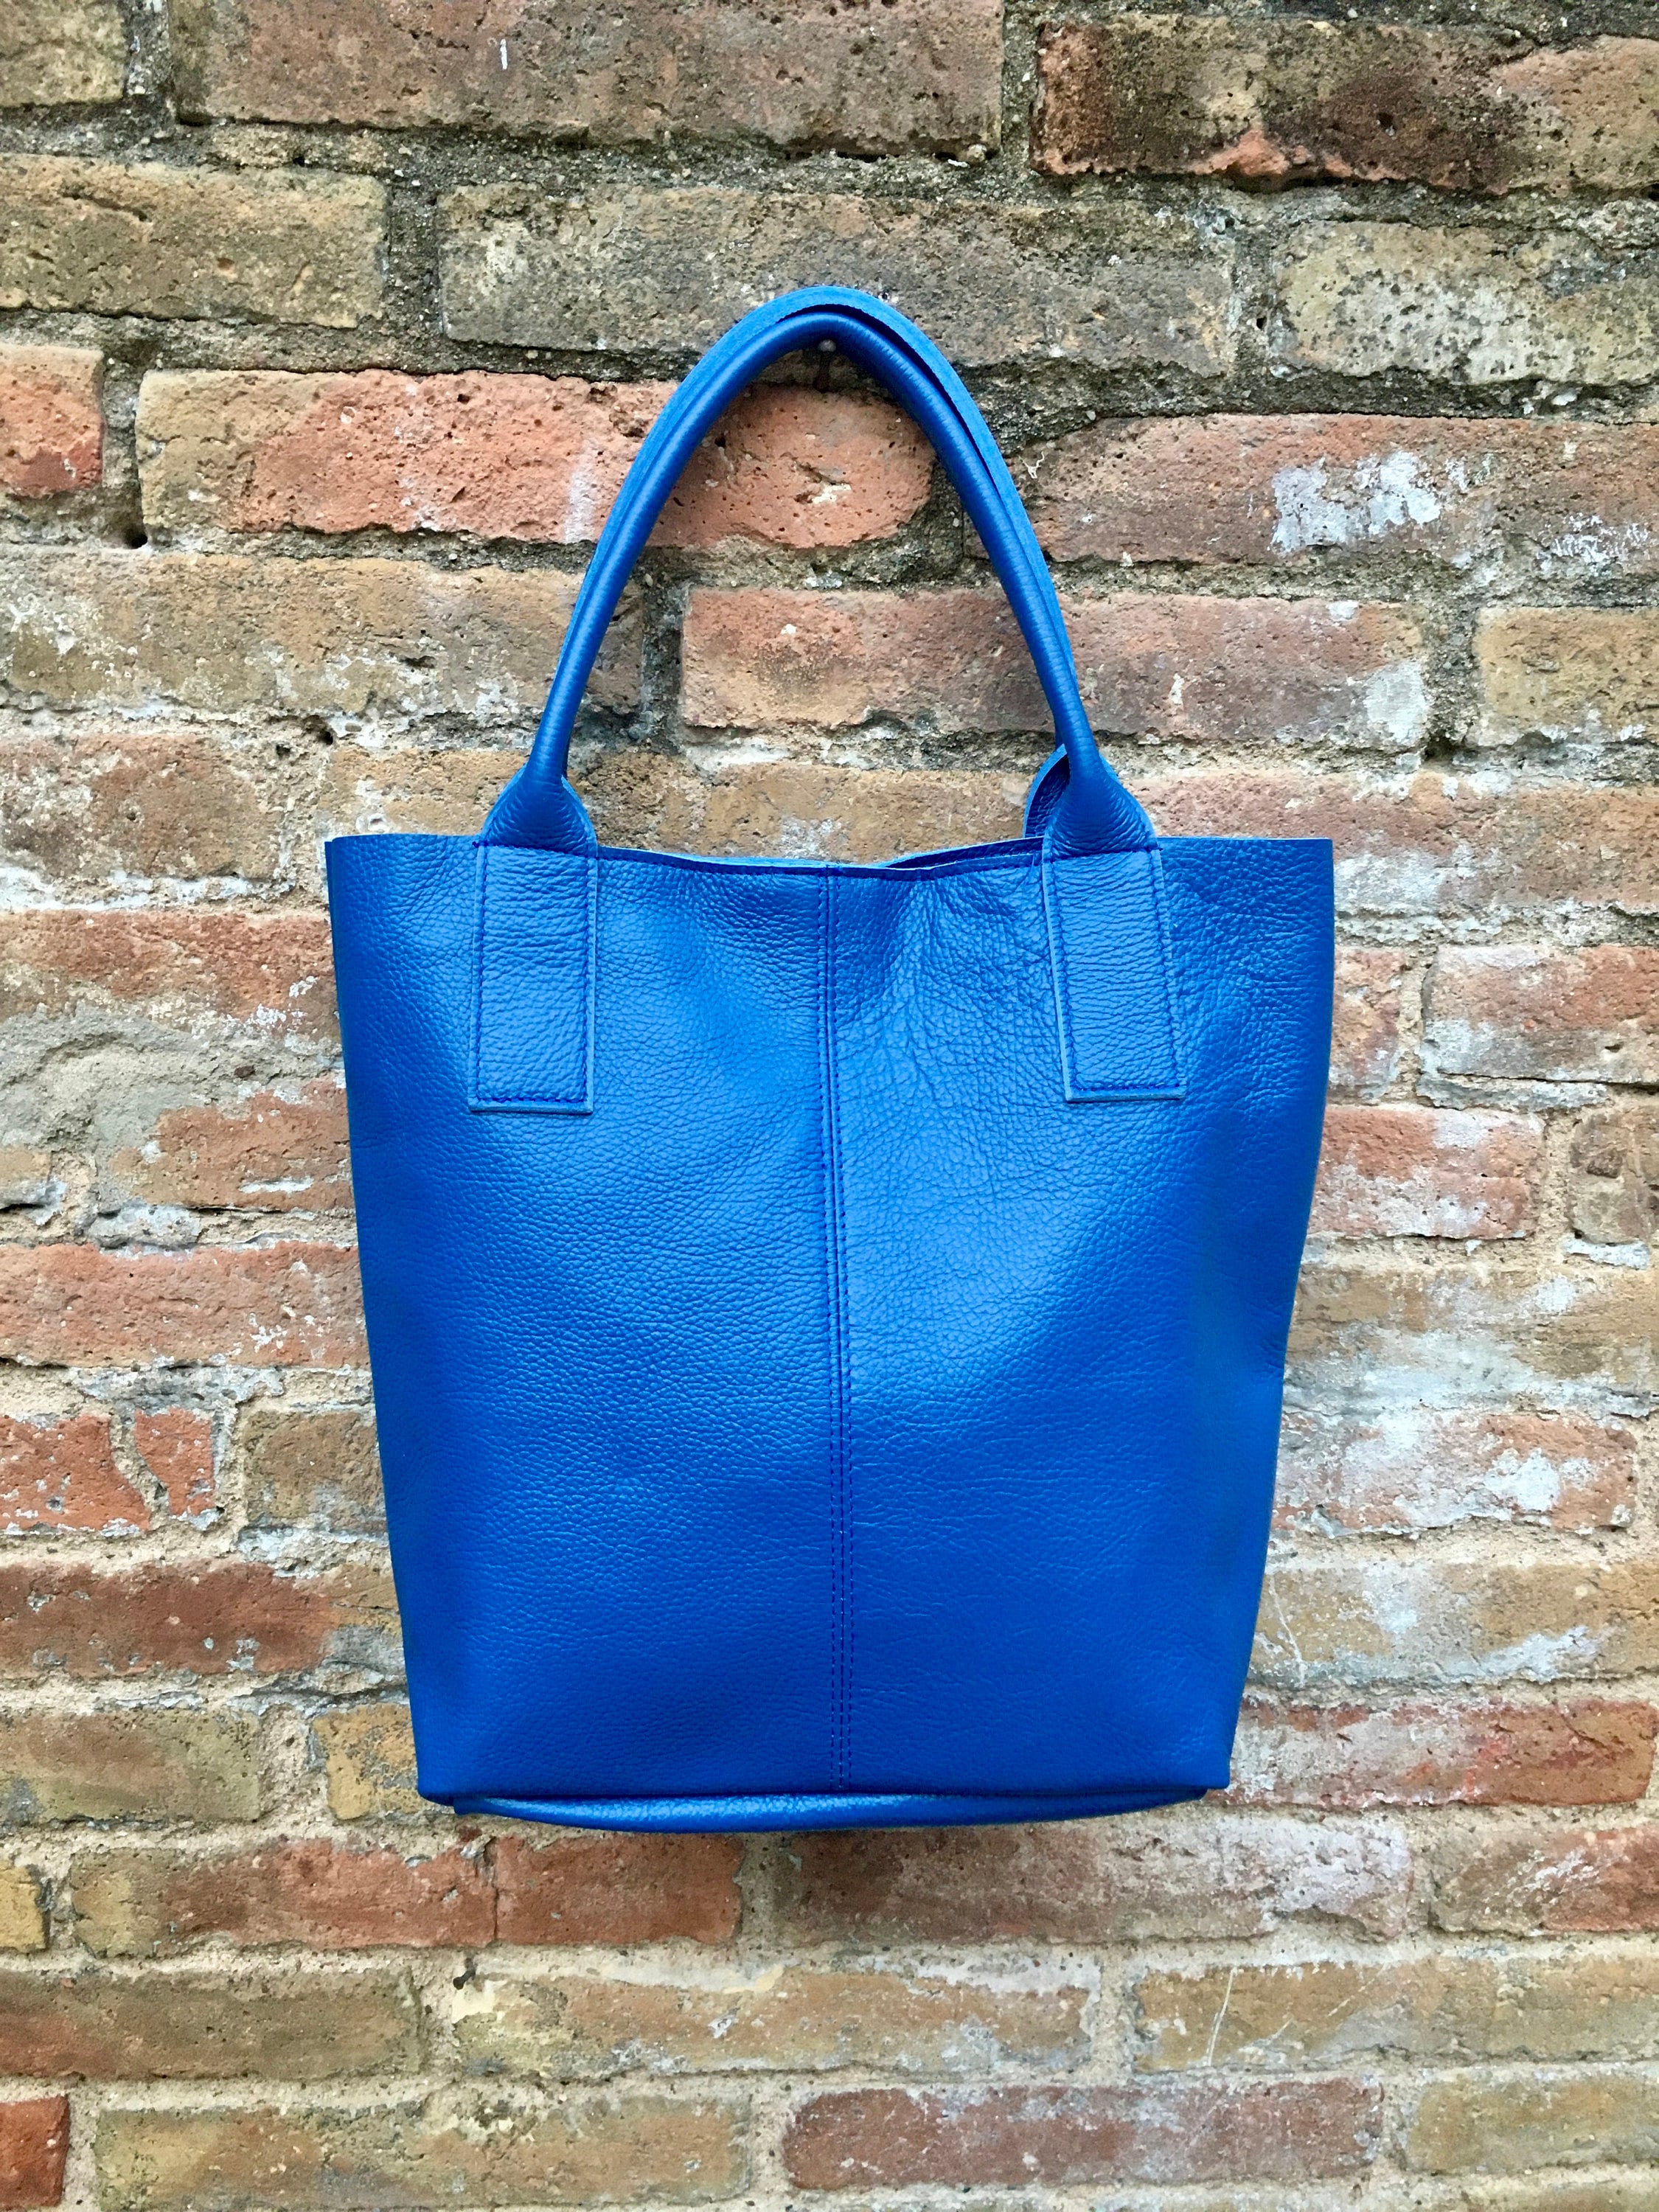 Tote Leather Bag in COBALT Blue. Leather Shopper in GENUINE | Etsy